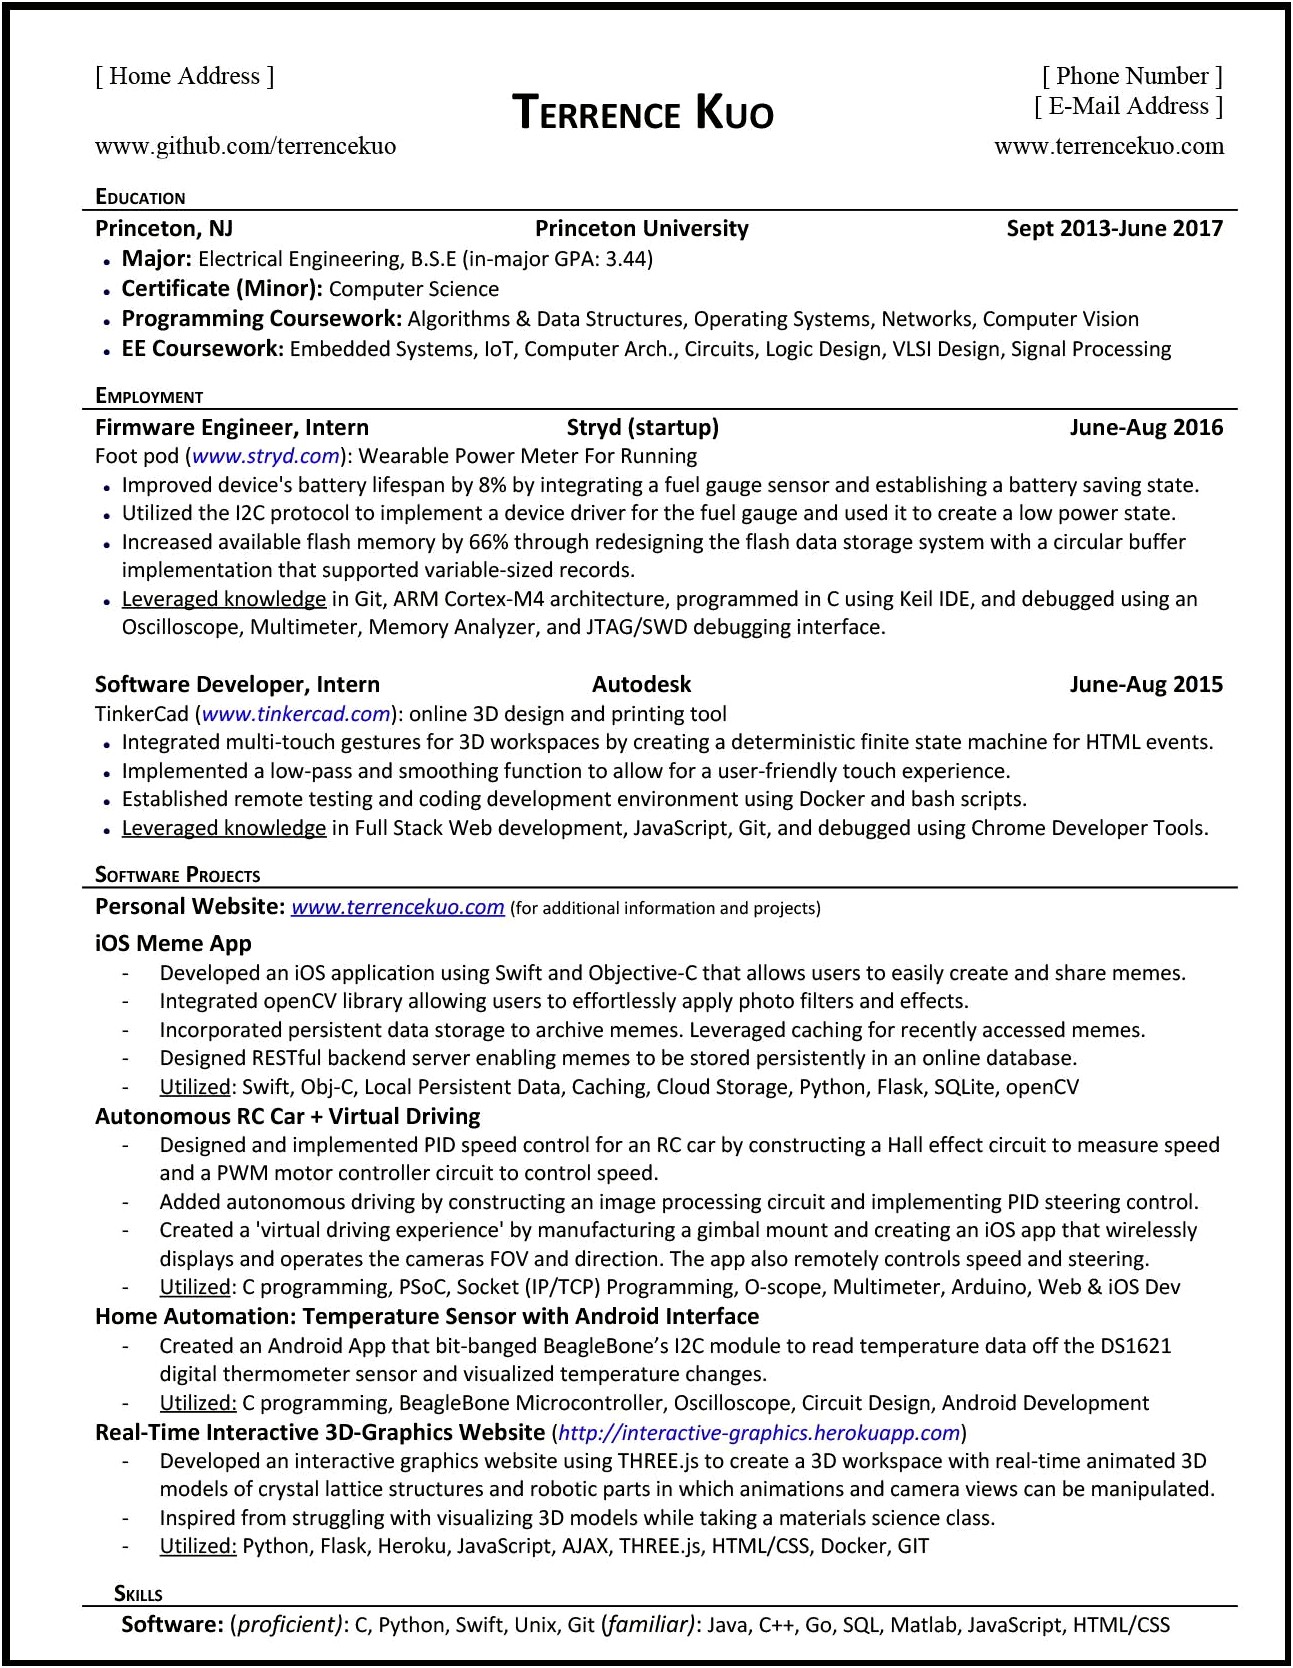 Put Interviewing People As Skill Role In Resume